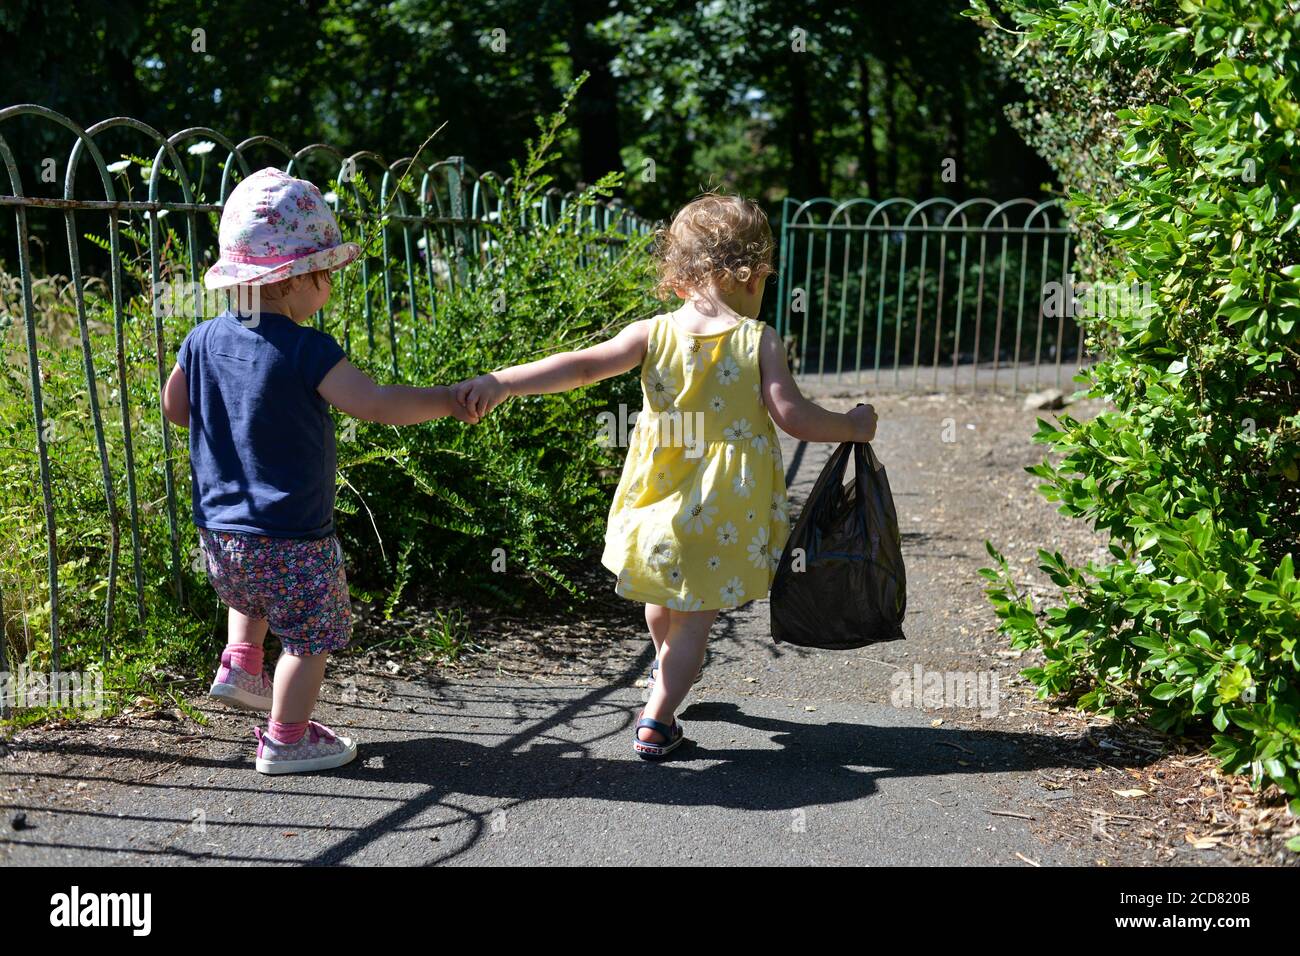 Two young children holding hands and walking away down a footpath in summer clothes and sunshine Stock Photo